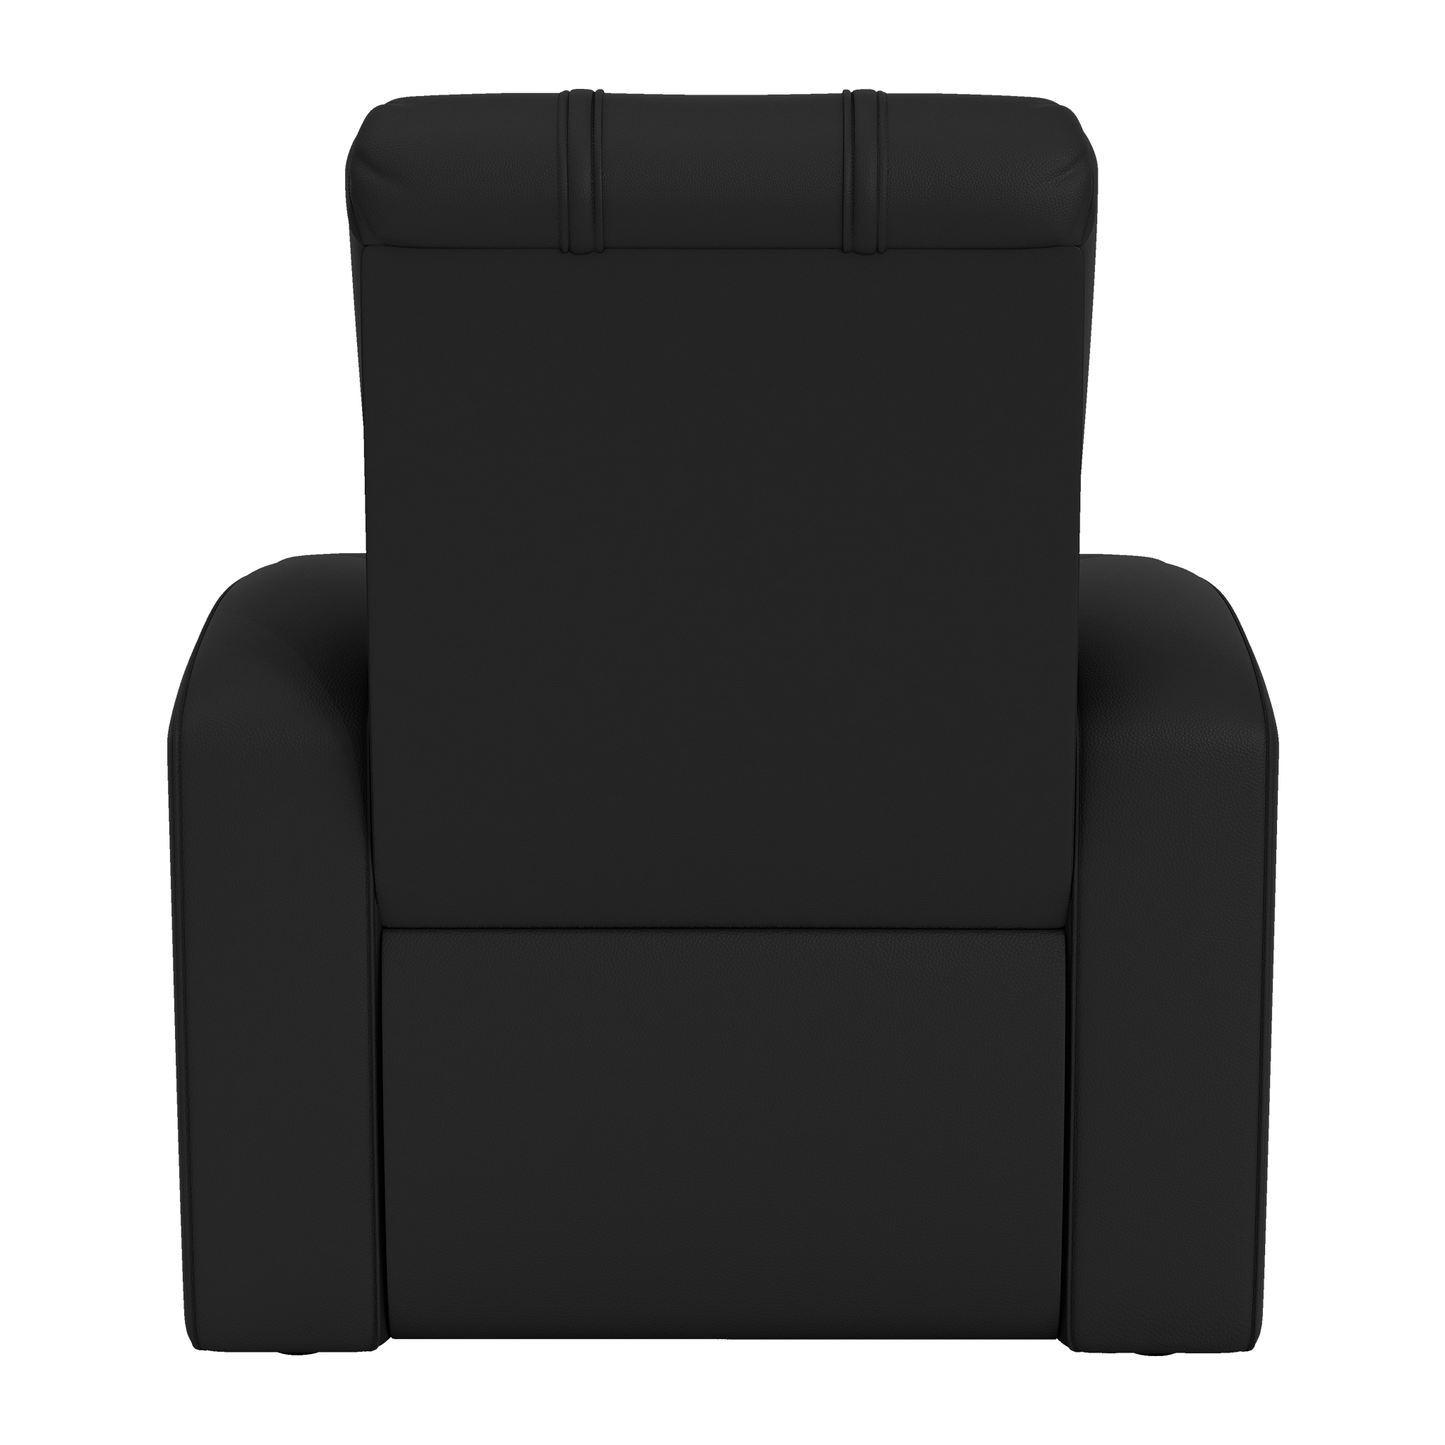 Relax Home Theater Recliner with Georgia Bulldogs Alternate Logo